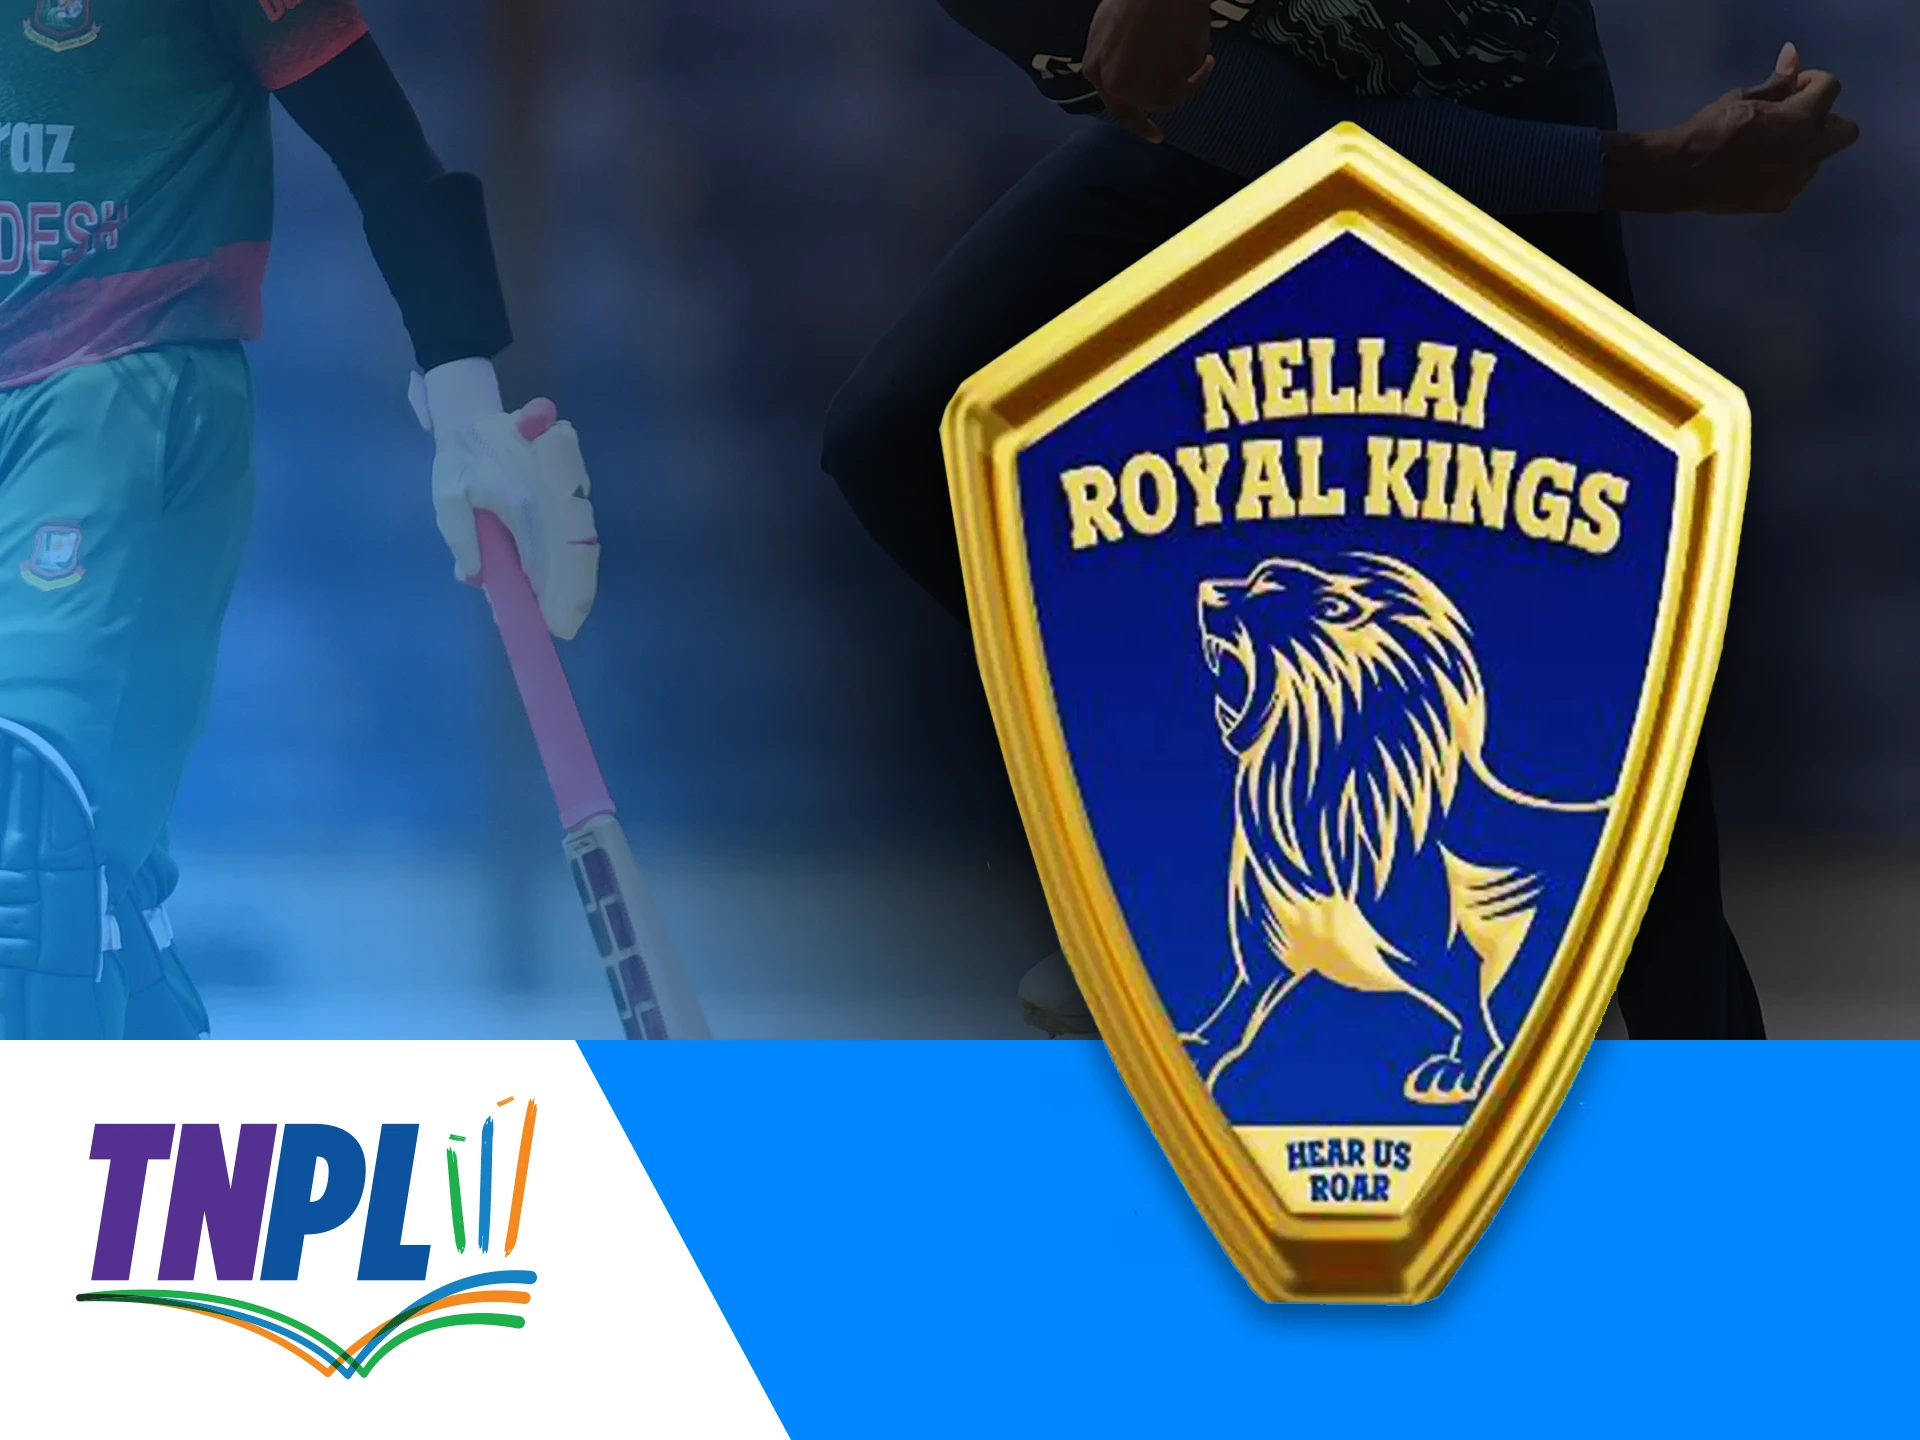 Nellai Royal Kings joined the TNPL in 2021.